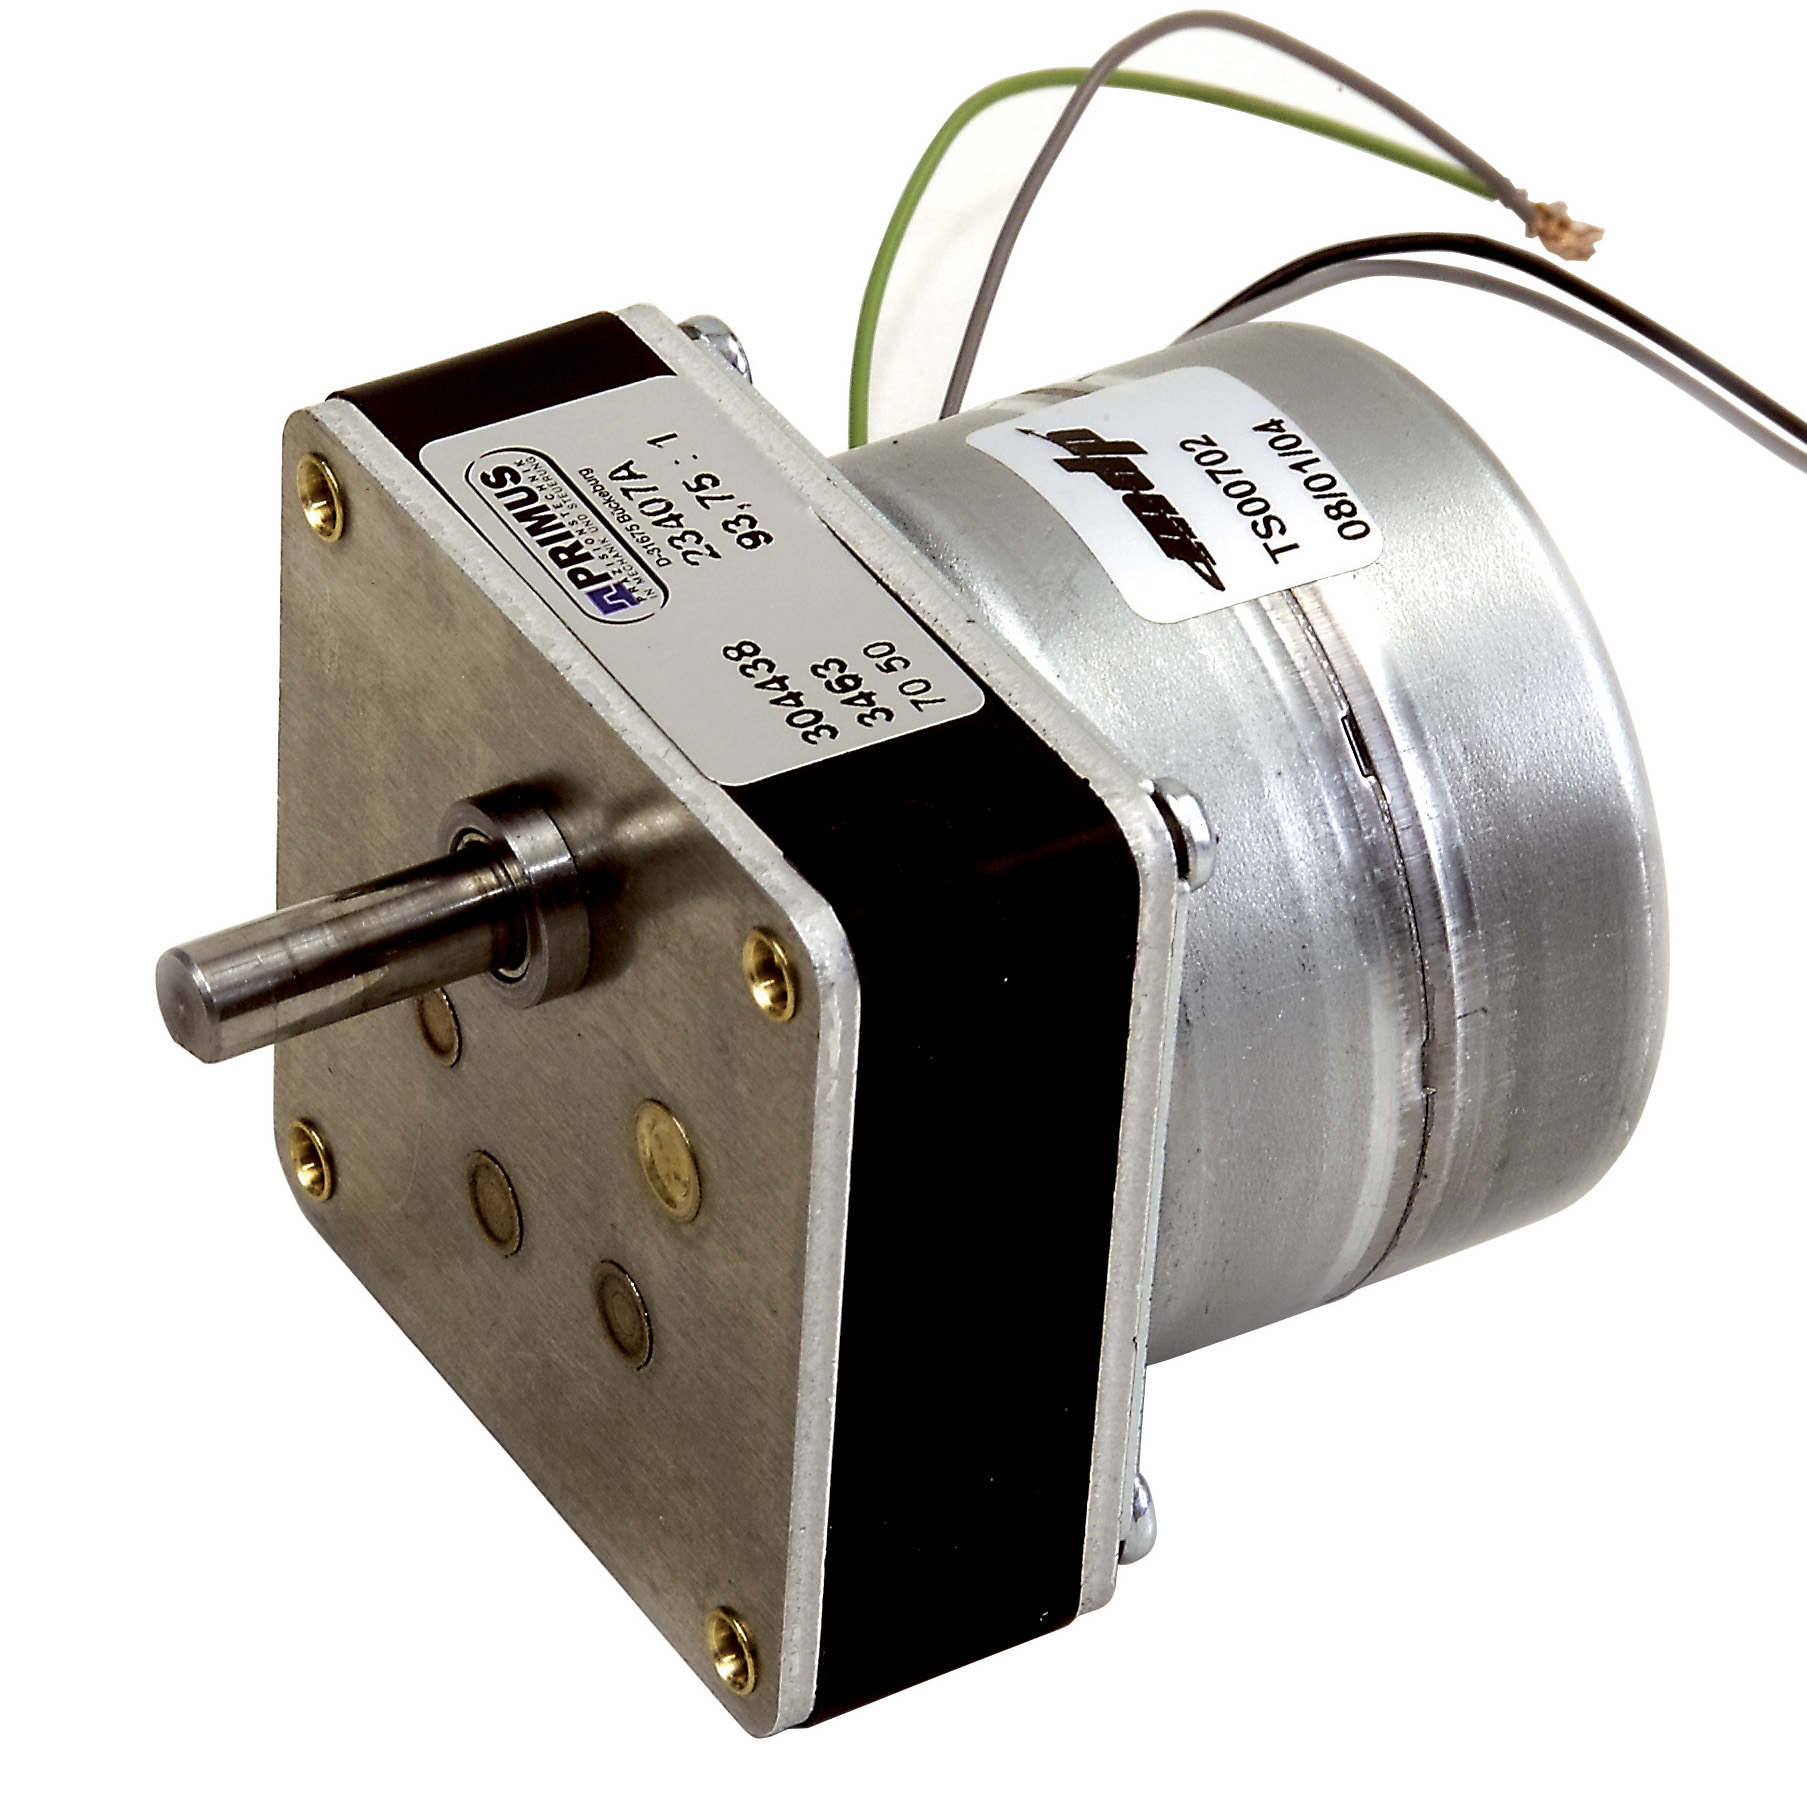 Synchronous AC Motor and- gearbox Nominal Torque (Nm):from 1.3 to 6Nm  Loaded speed (rpm):de 0.5 à 31 Supply voltage:230V